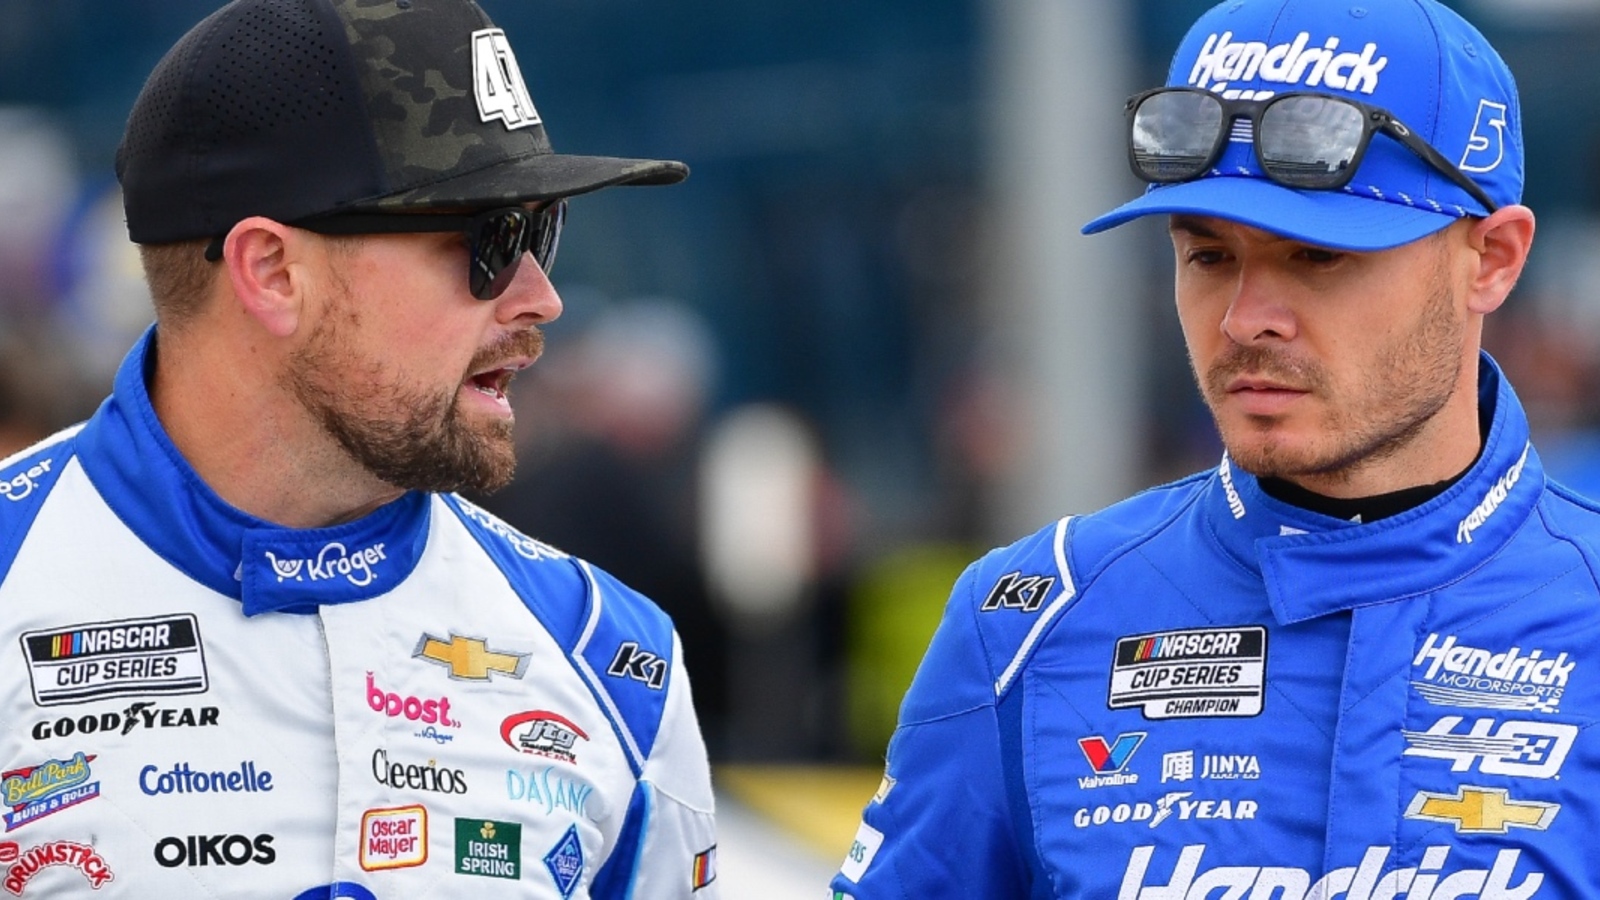 Kyle Larson believes Ricky Stenhouse Jr. would ‘for sure’ beat Kyle Busch in an actual fight